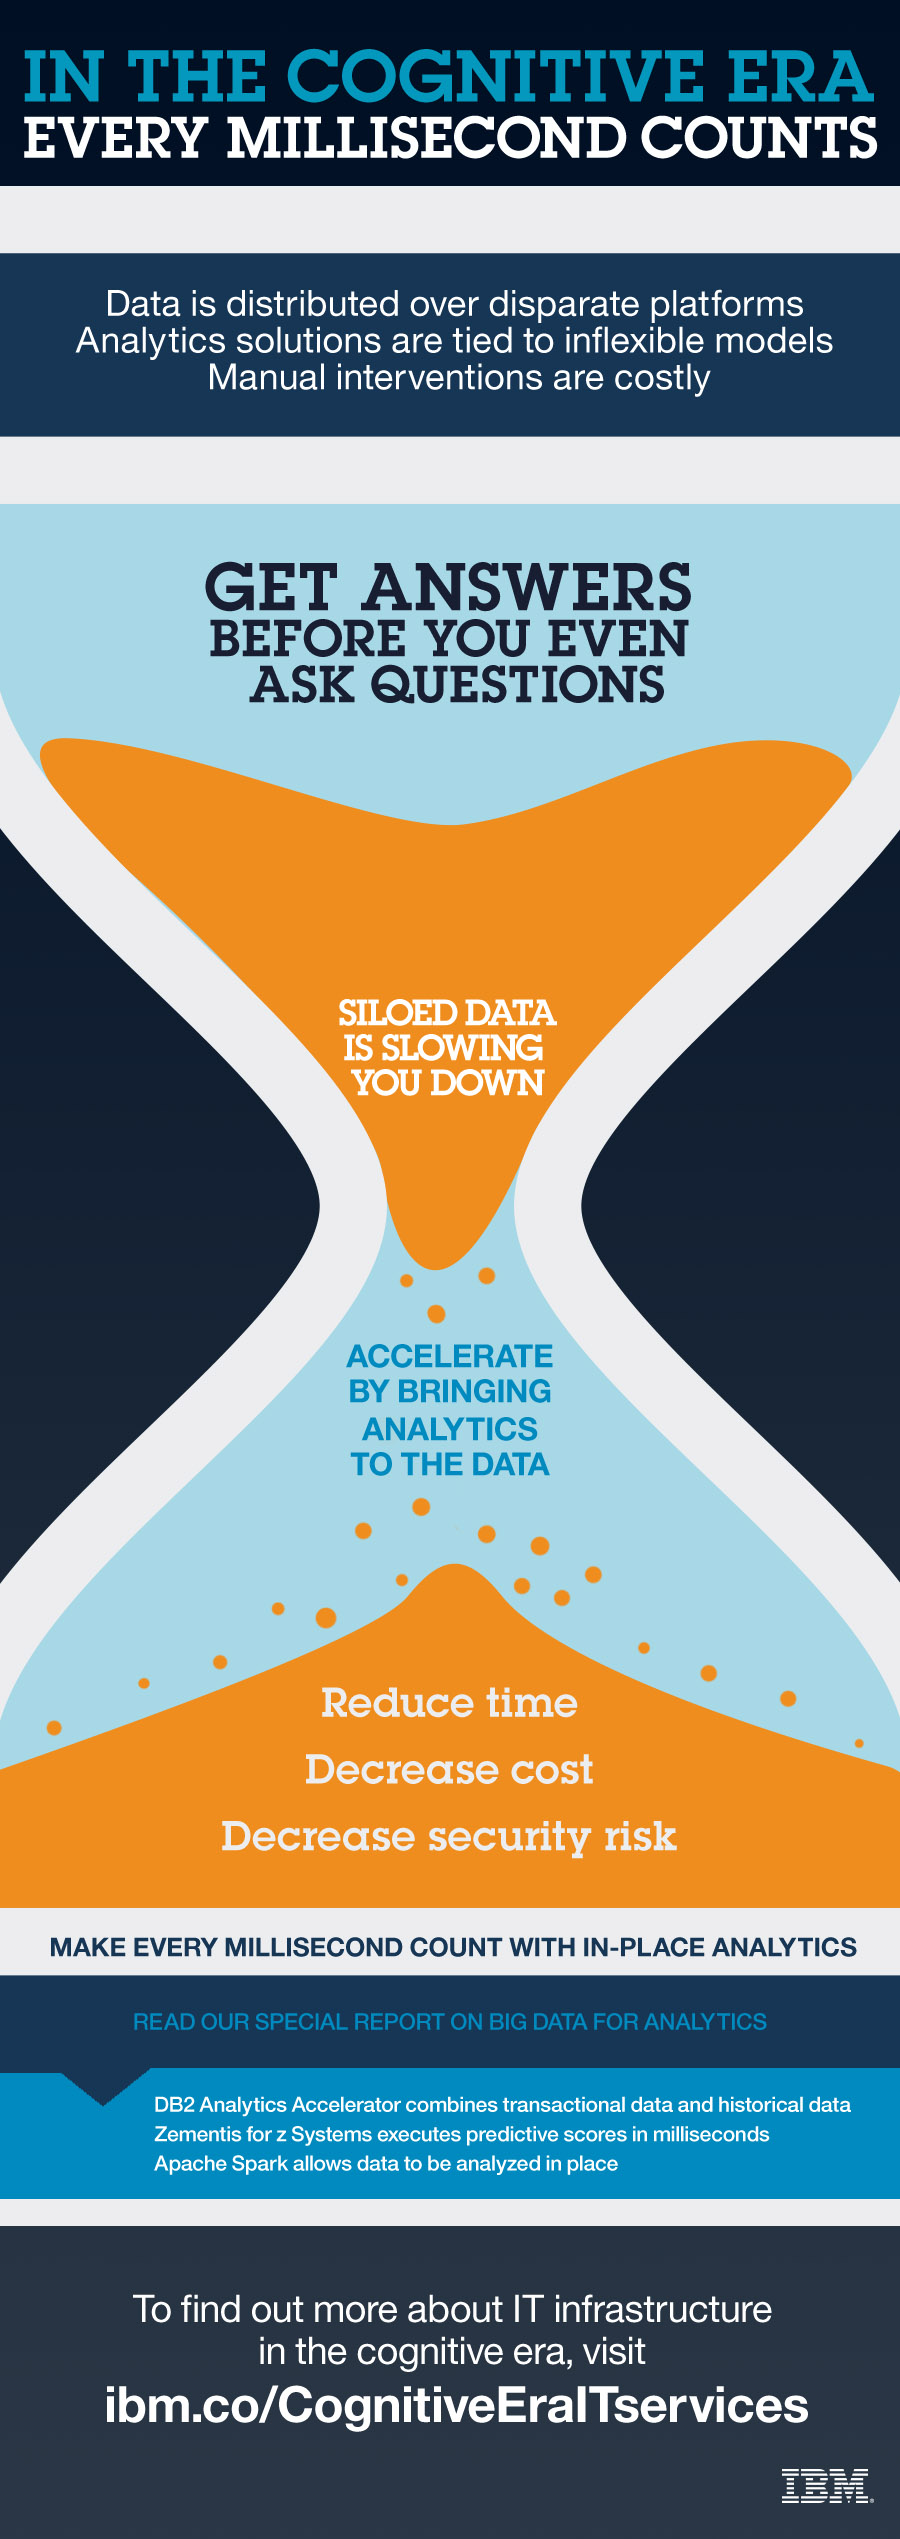 5397_IBM_Systems_Social_Infographic_Every_Millisecond